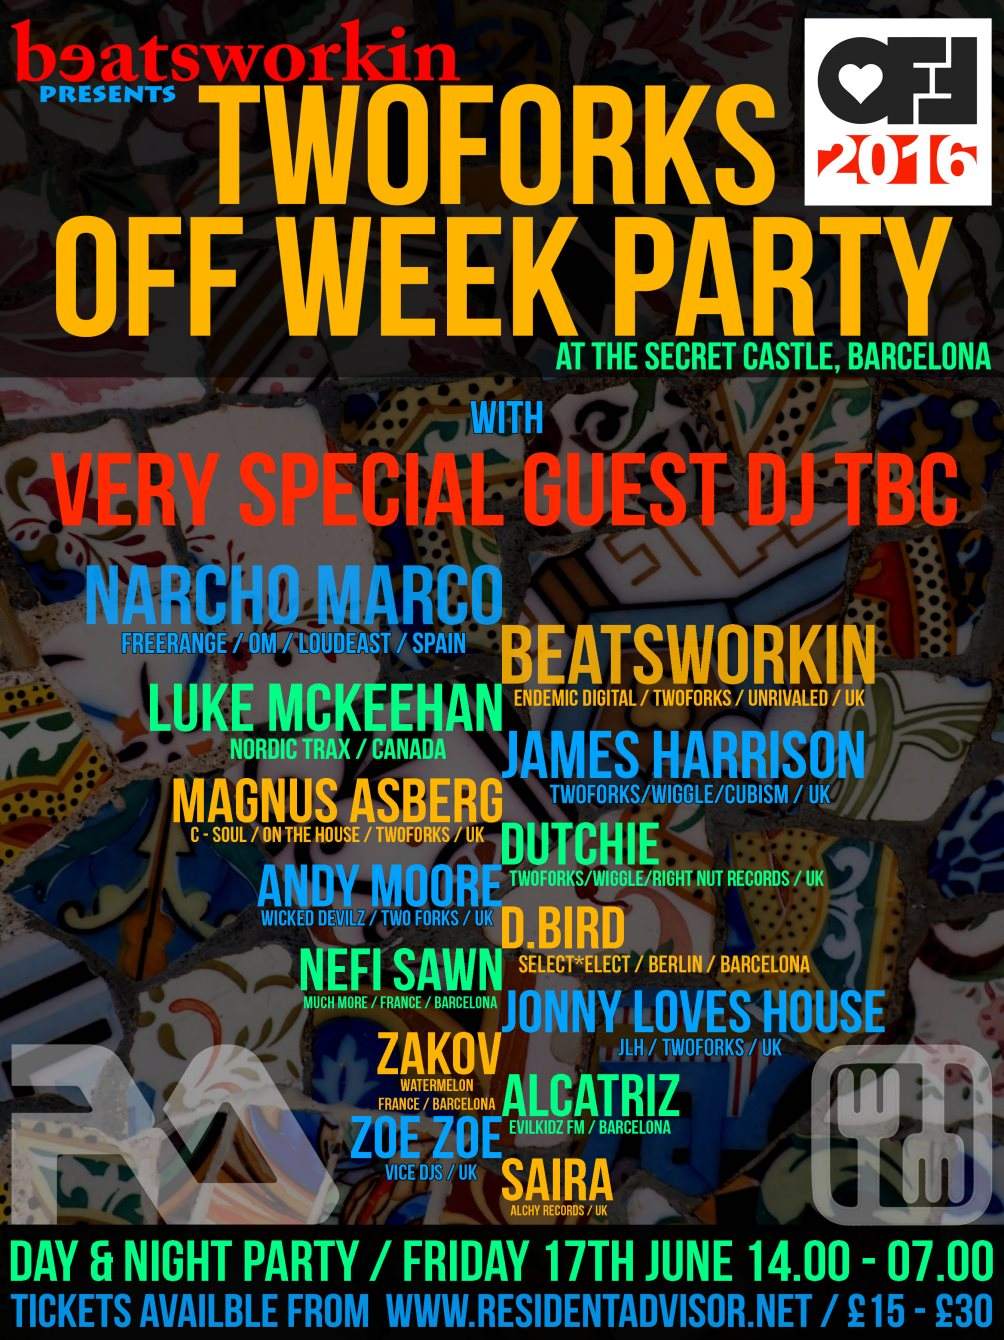 [CANCELLED] Beatsworkin presents: Twoforks Off Week Secret Castle Party with Vincenzo & Funk D'void - フライヤー裏